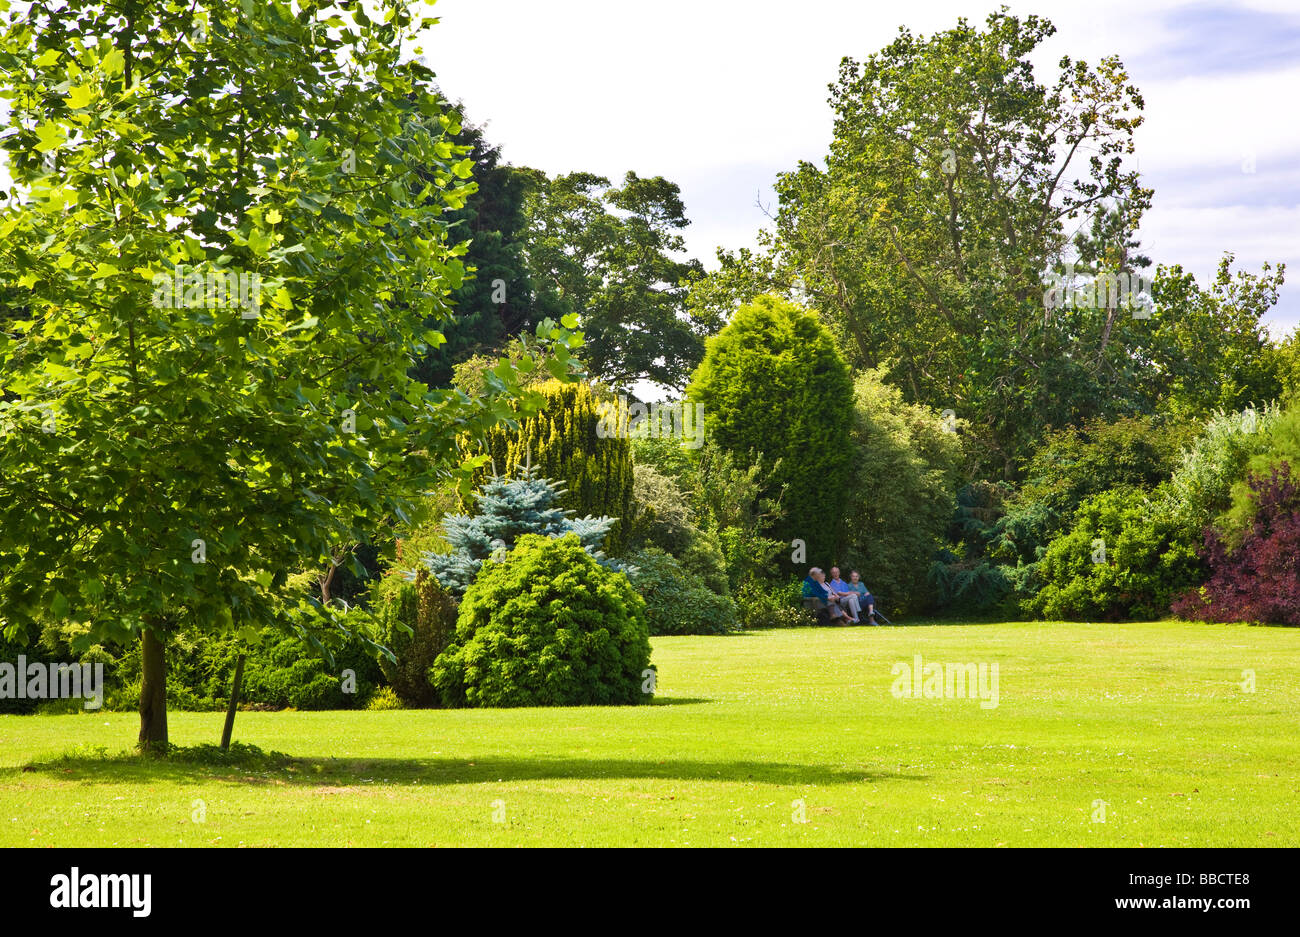 Four elderly people sitting on a bench in a shady spot of a garden or park lawn surrounded by large trees shrubs and bushes Stock Photo